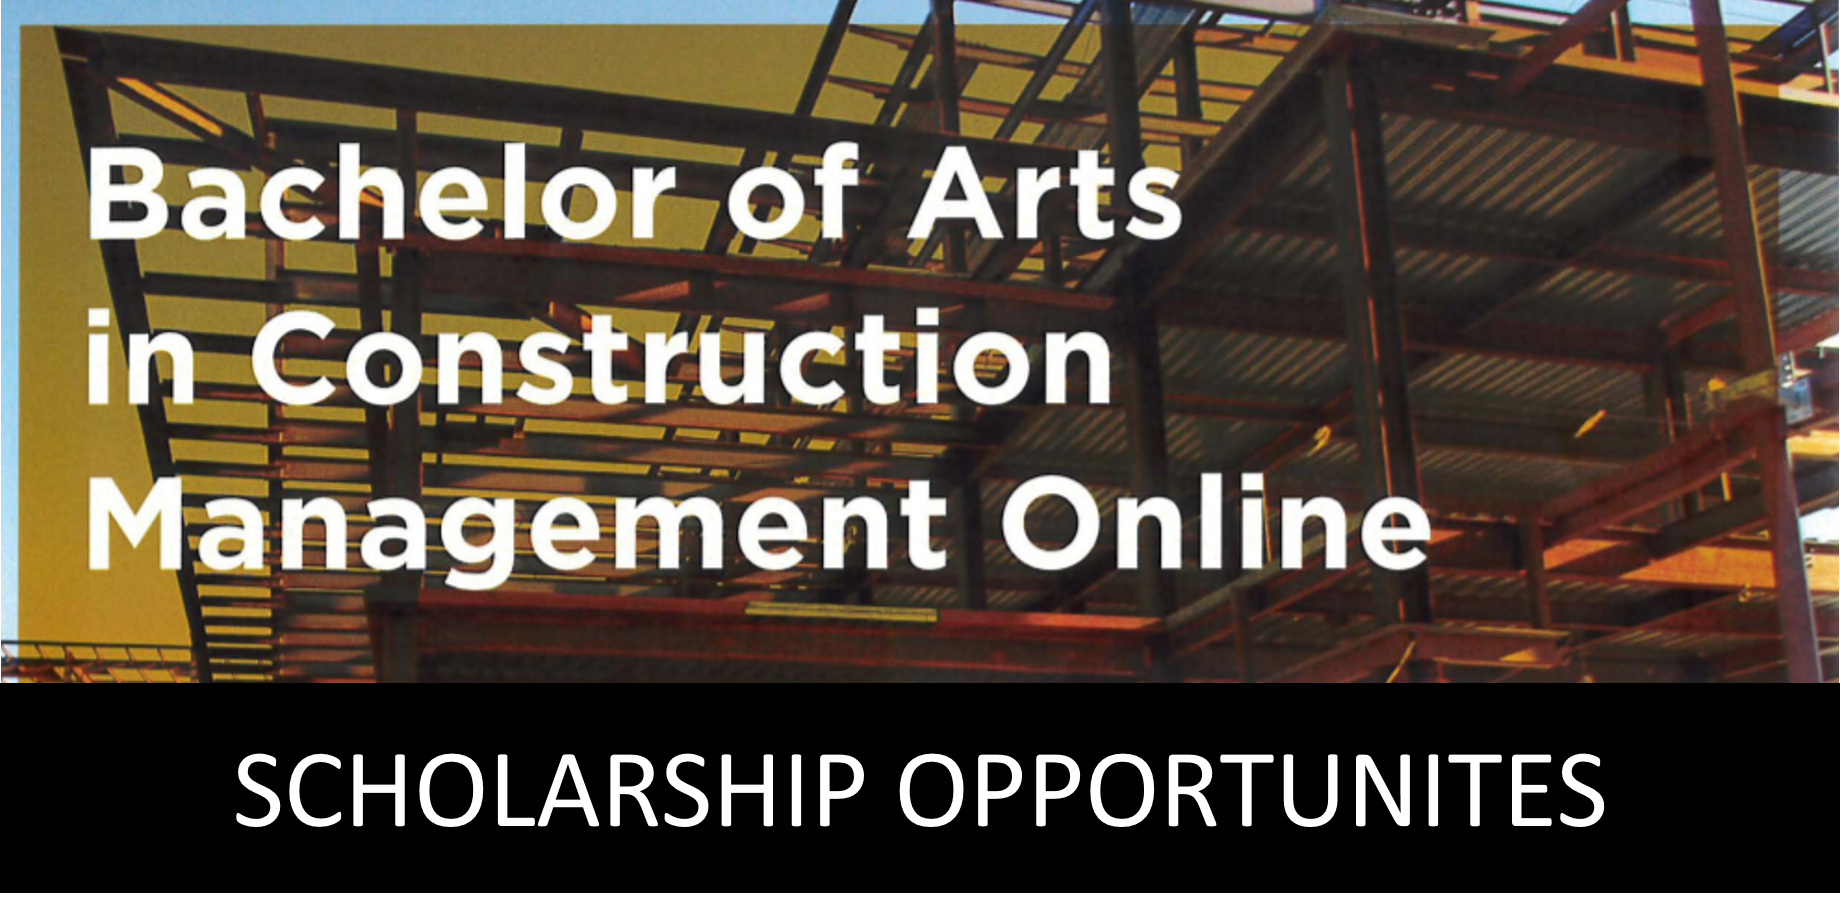 Scholarships Available for a B.A. in Construction Management Online